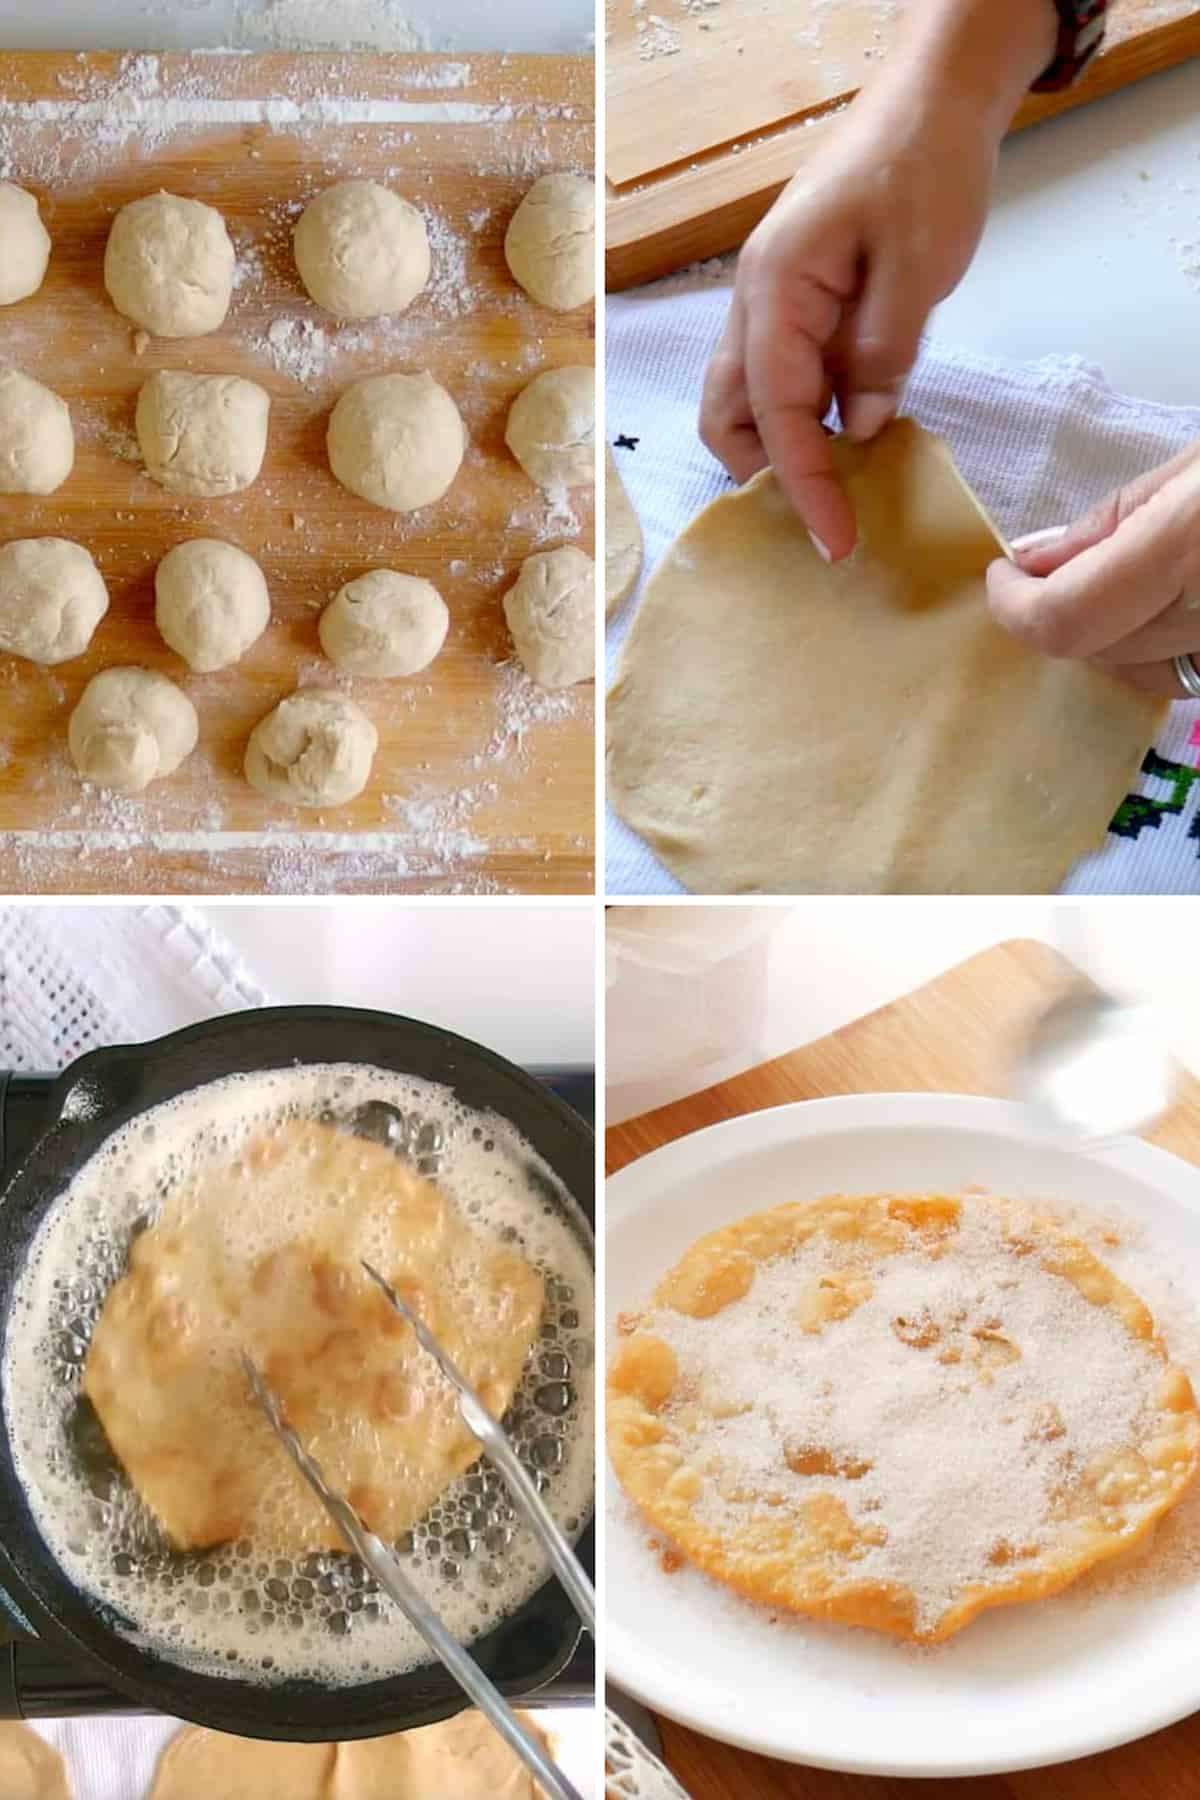 grid style photo showing remaining steps for making Mexican buñuelos - shaping the dough into balls, rolling it into thin tortillas to dry on a kitchen towel, deep-frying, and seasoning with cinnamon sugar.